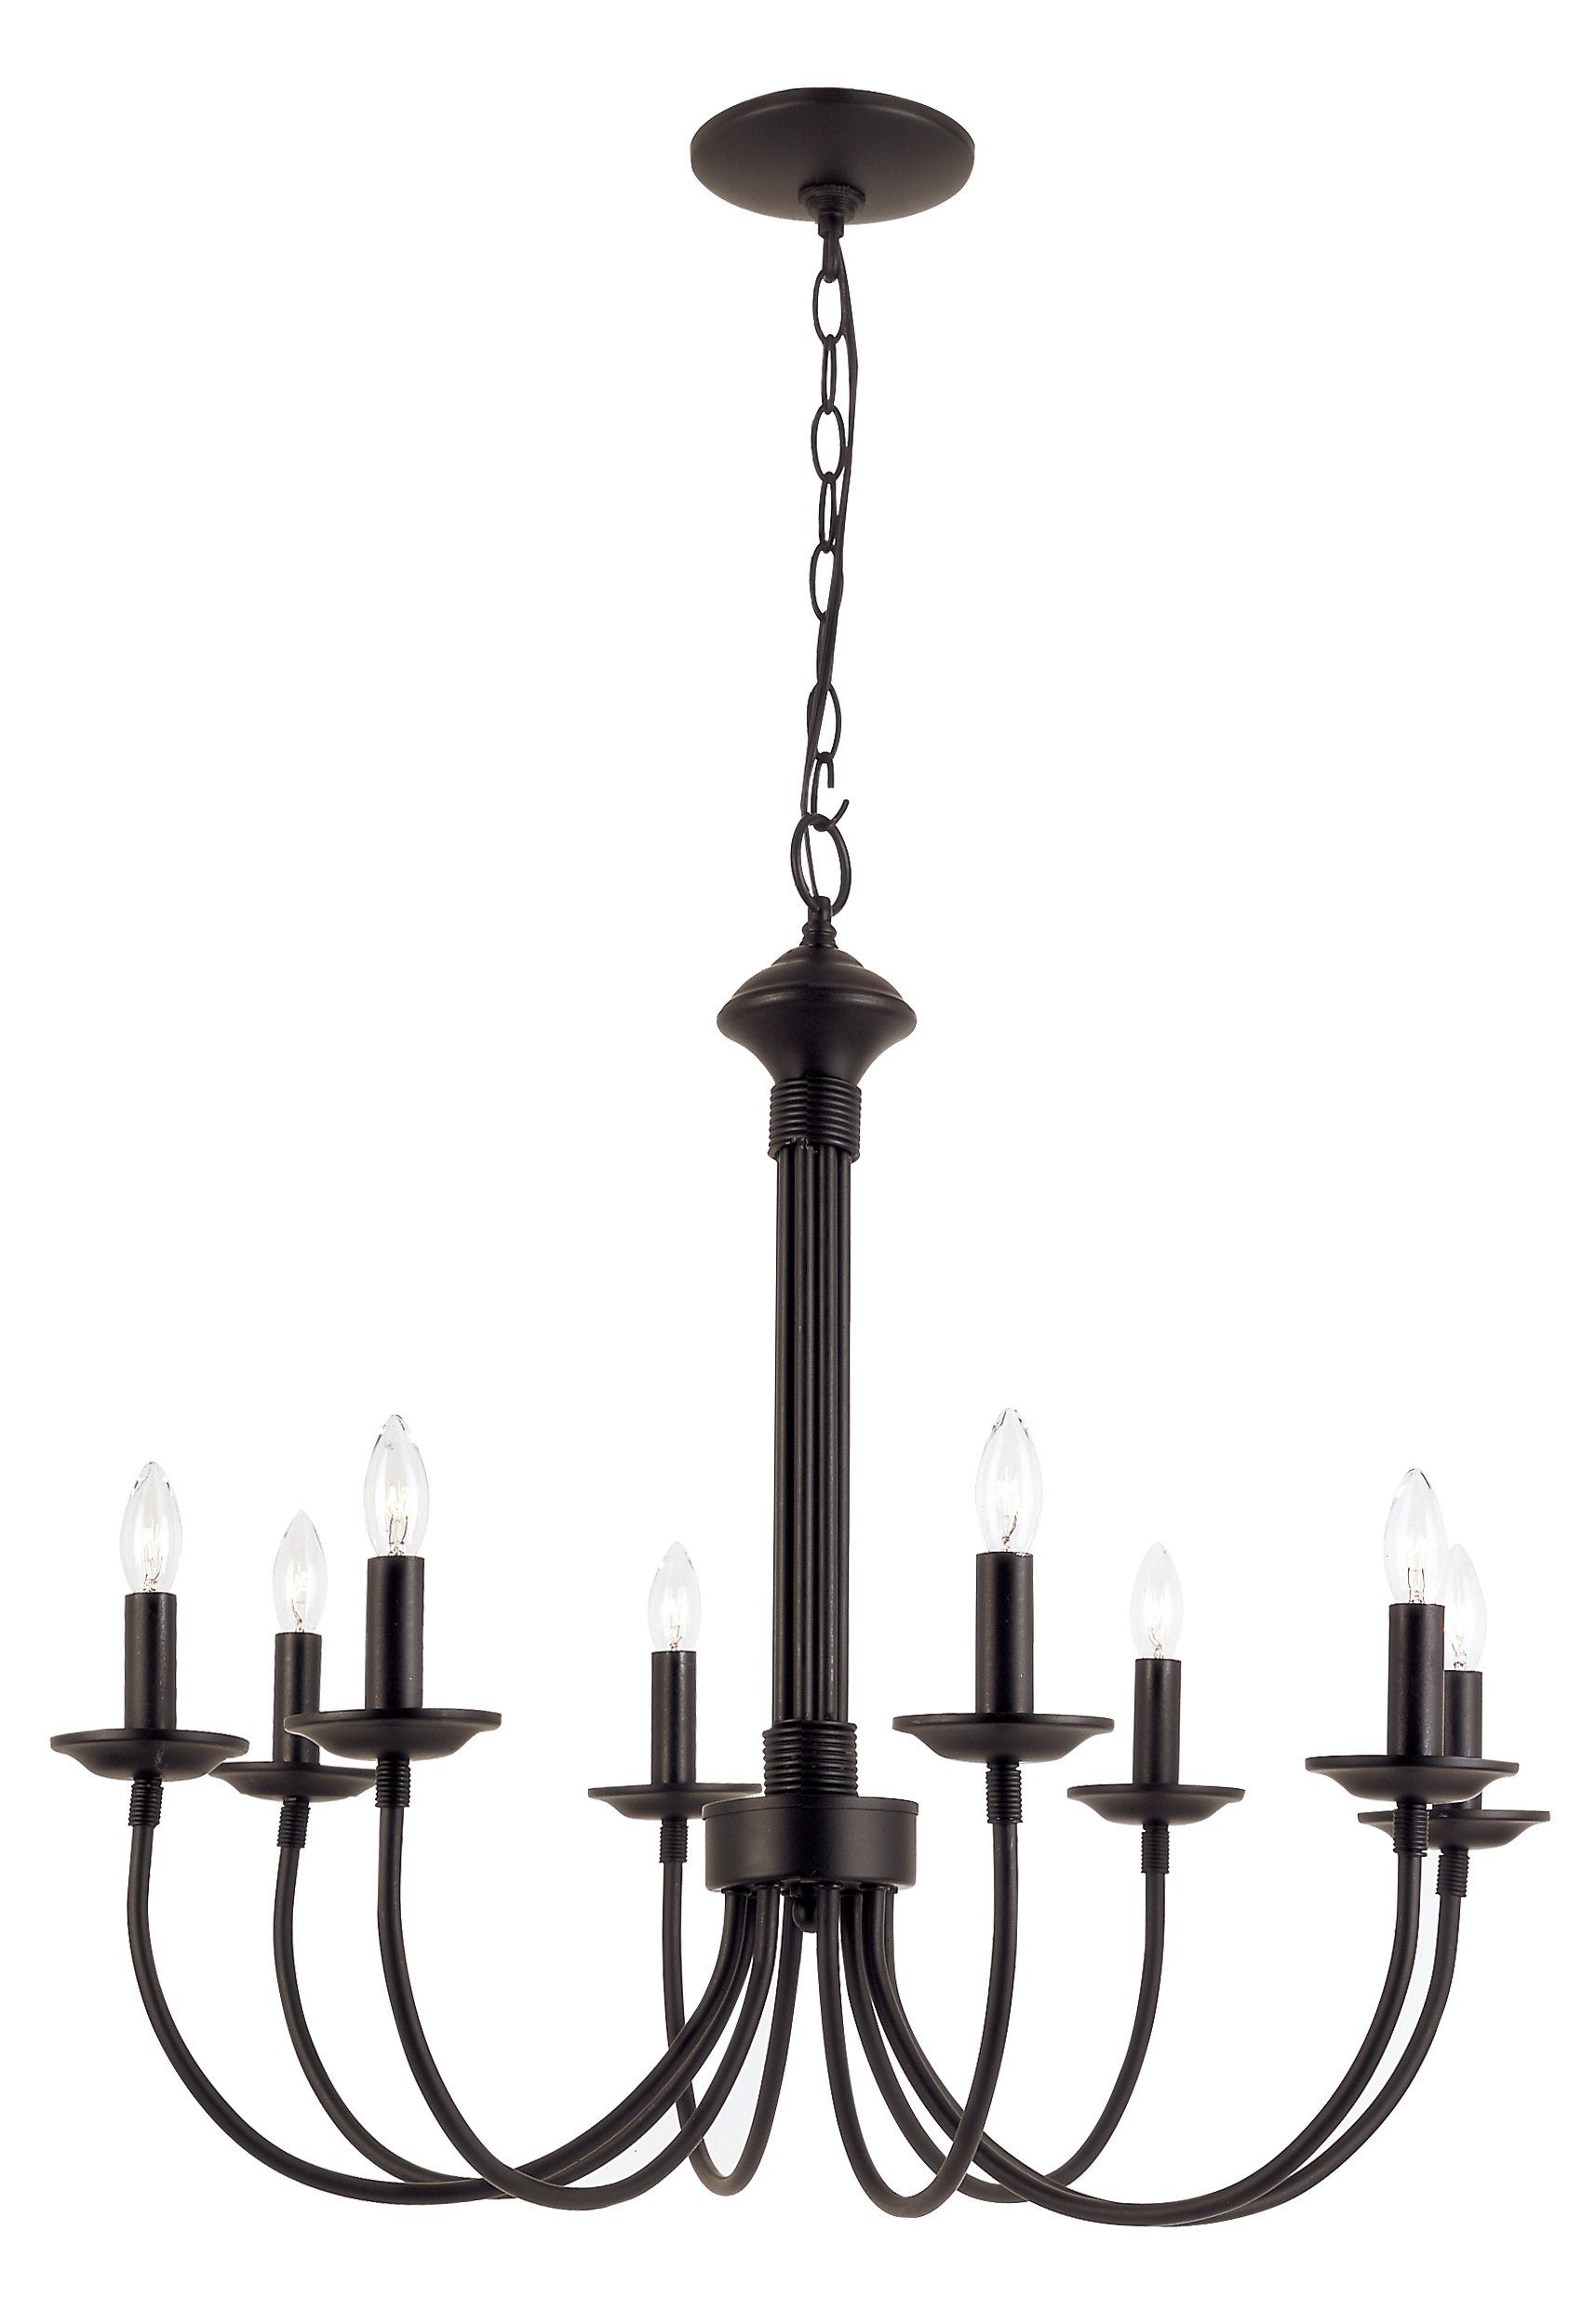 Shaylee 8 Light Candle Style Chandelier Within Perseus 6 Light Candle Style Chandeliers (View 21 of 30)